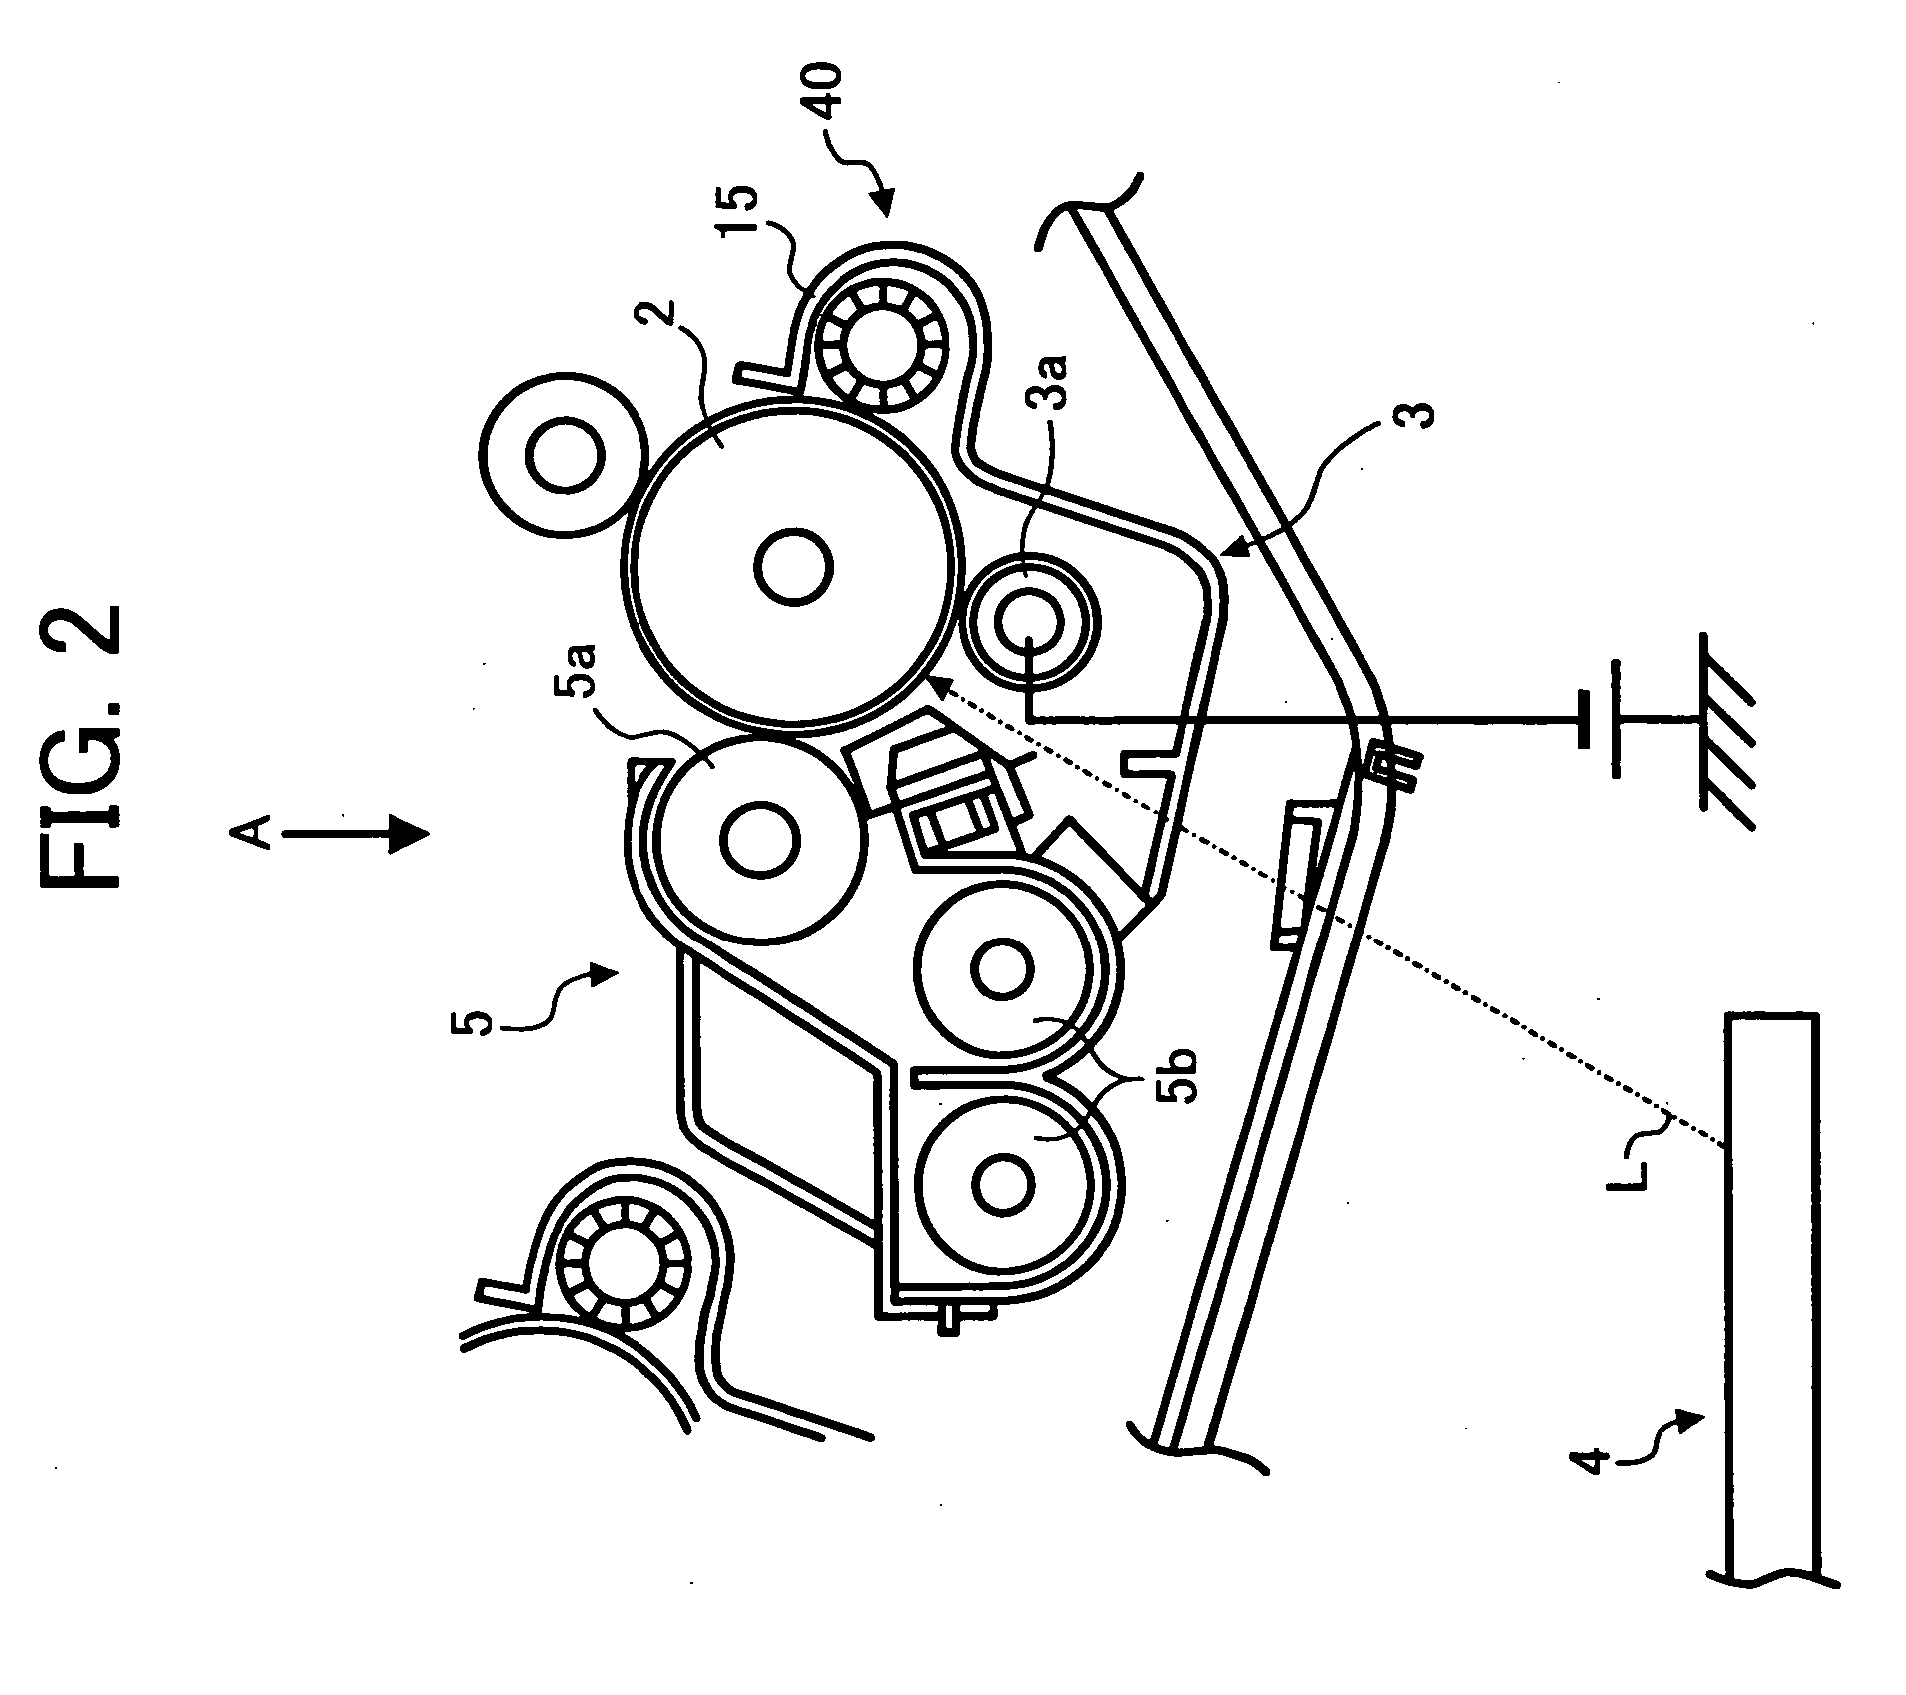 Image forming apparatus having a detachable cartridge including a photoconductive drum with axis shaft having a minimal rotational eccentricity, and a method of assembling the image forming apparatus